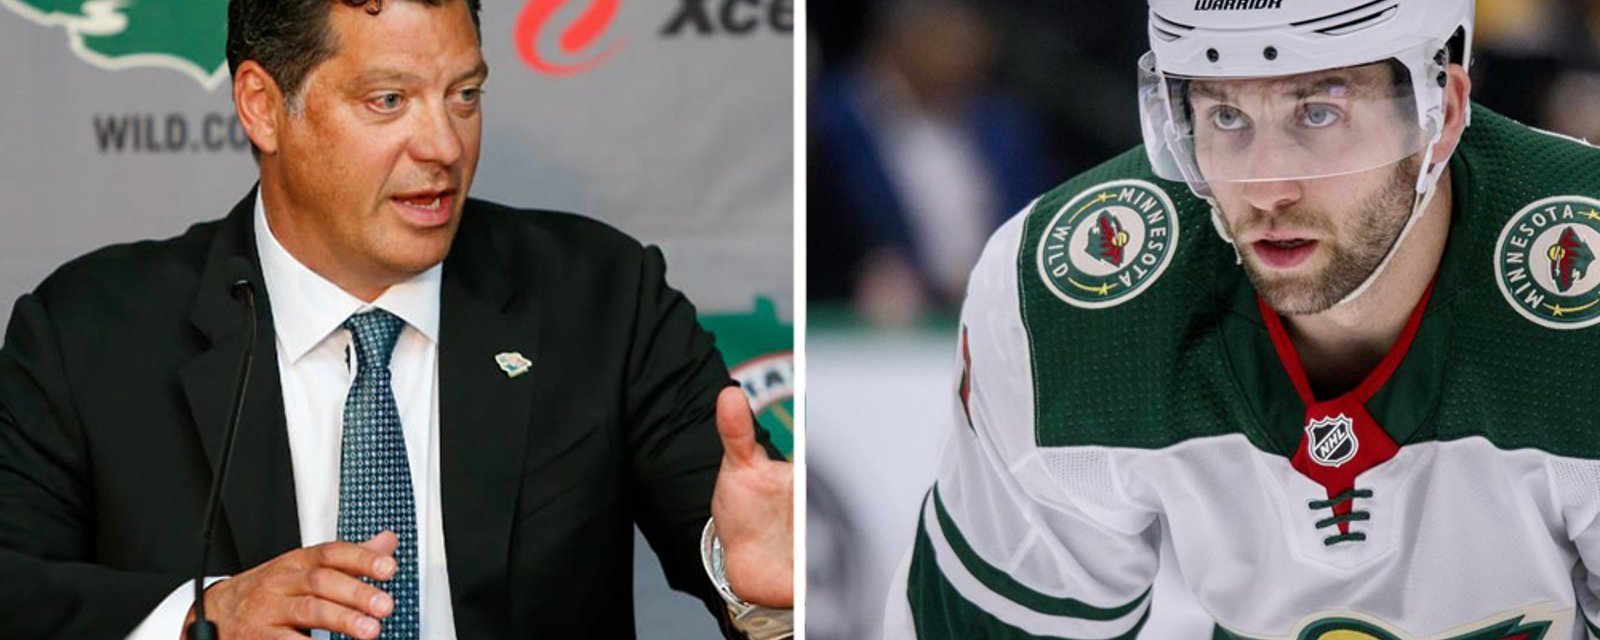 Wild GM Guerin throws a bomb at Zucker, threatens more trades